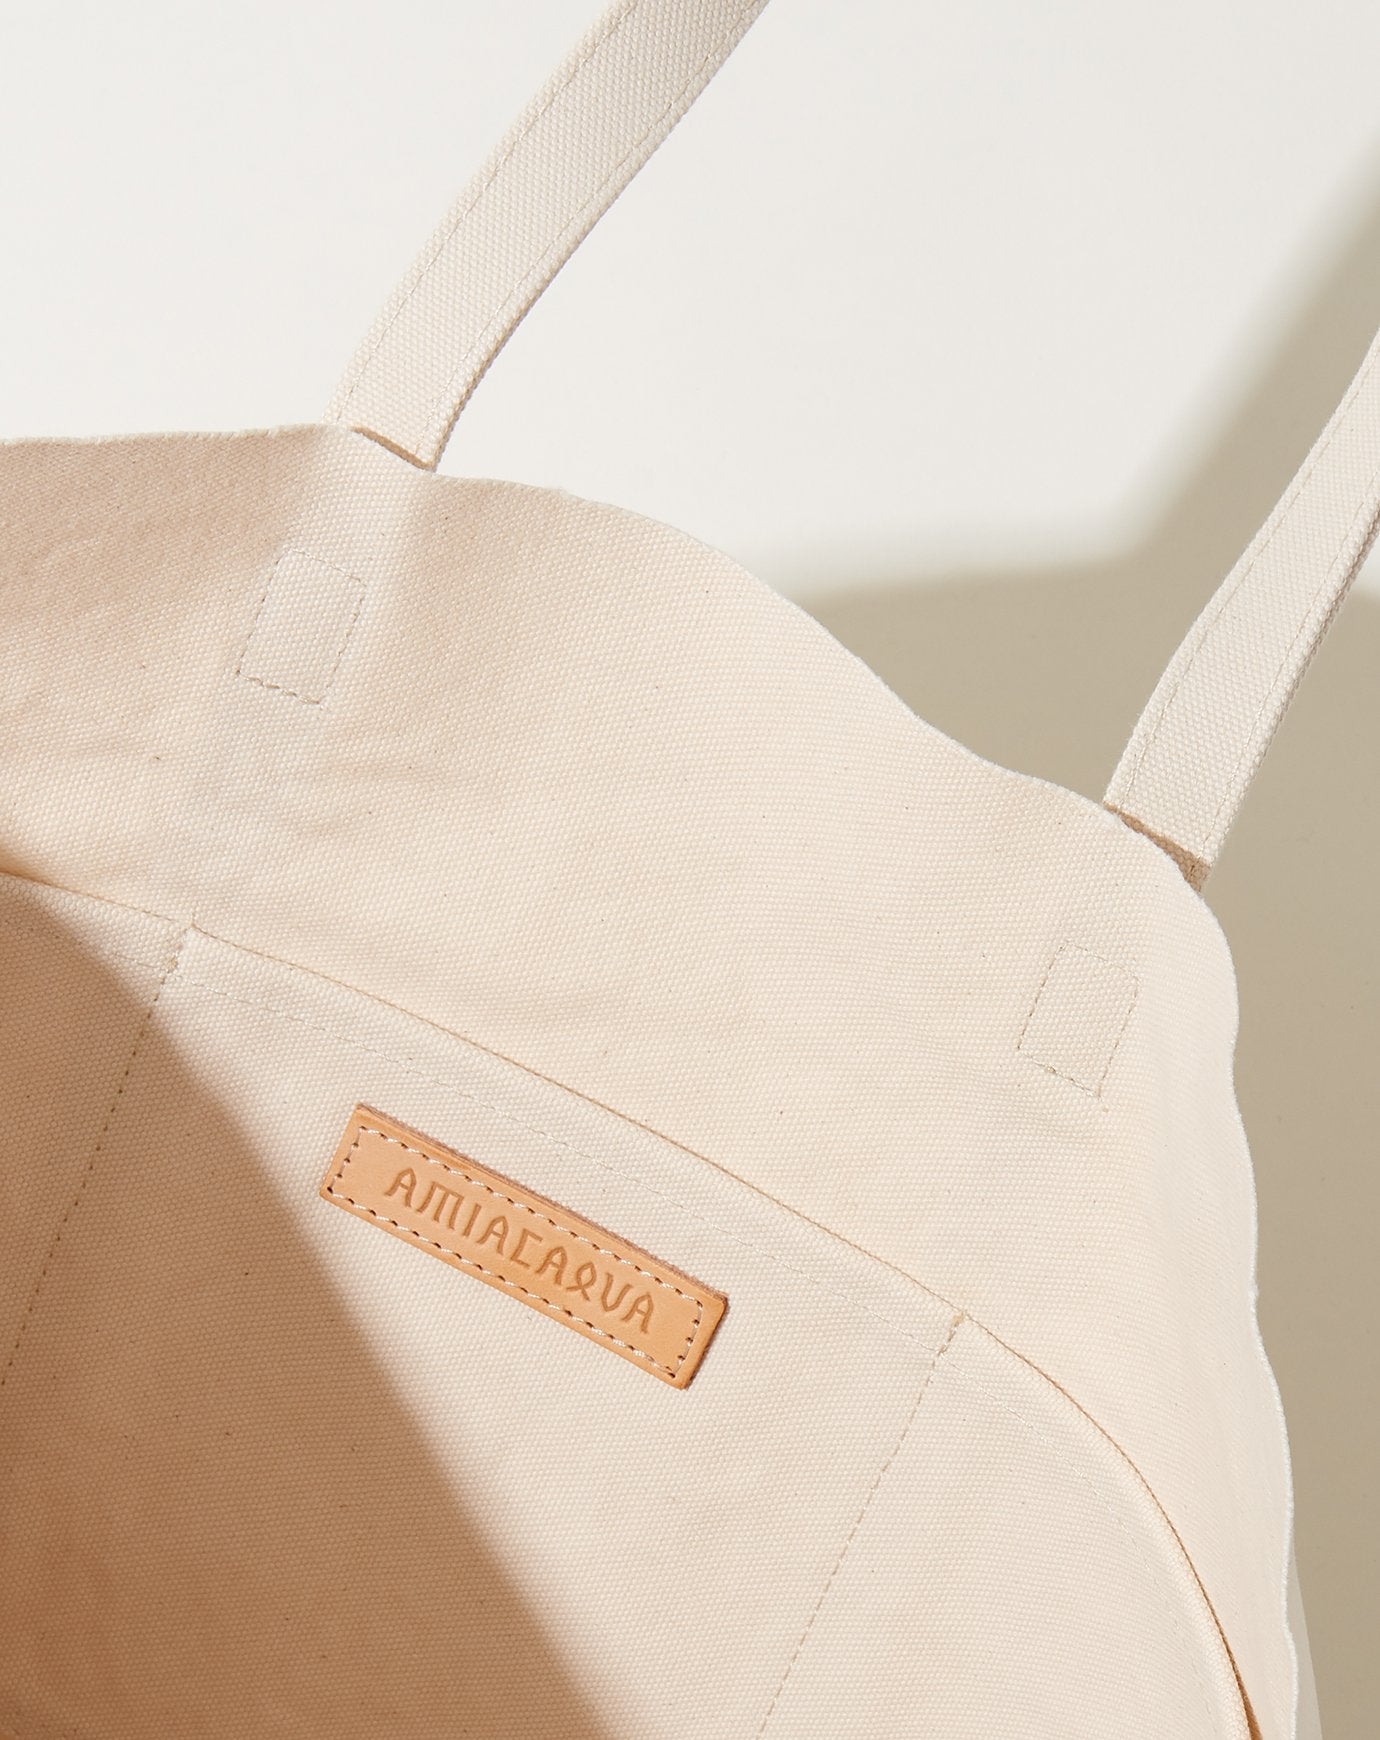 Amiacalva Washed Canvas 6 Pocket Tote in White